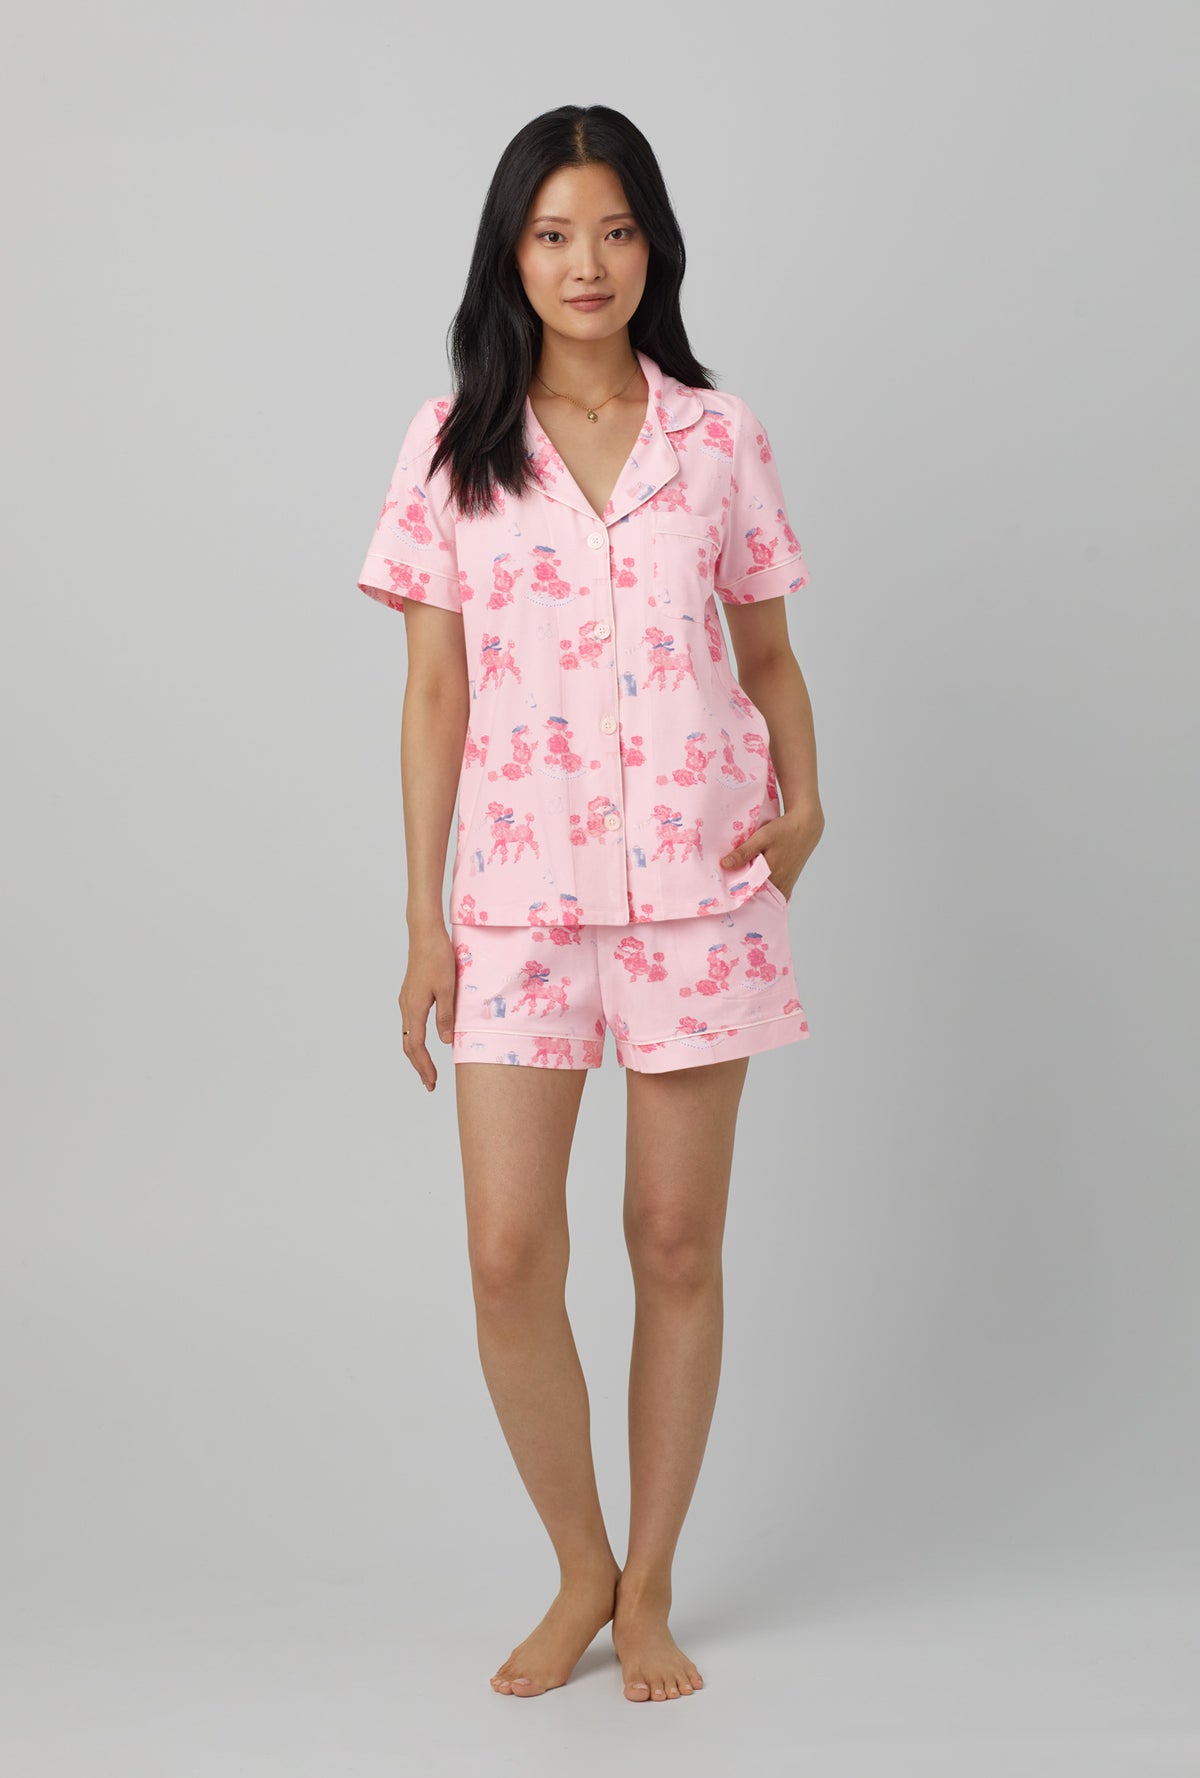 A lady wearing Pink Short Sleeve Classic Short Set Stretch Jersey PJ Set with pampered Poodles print